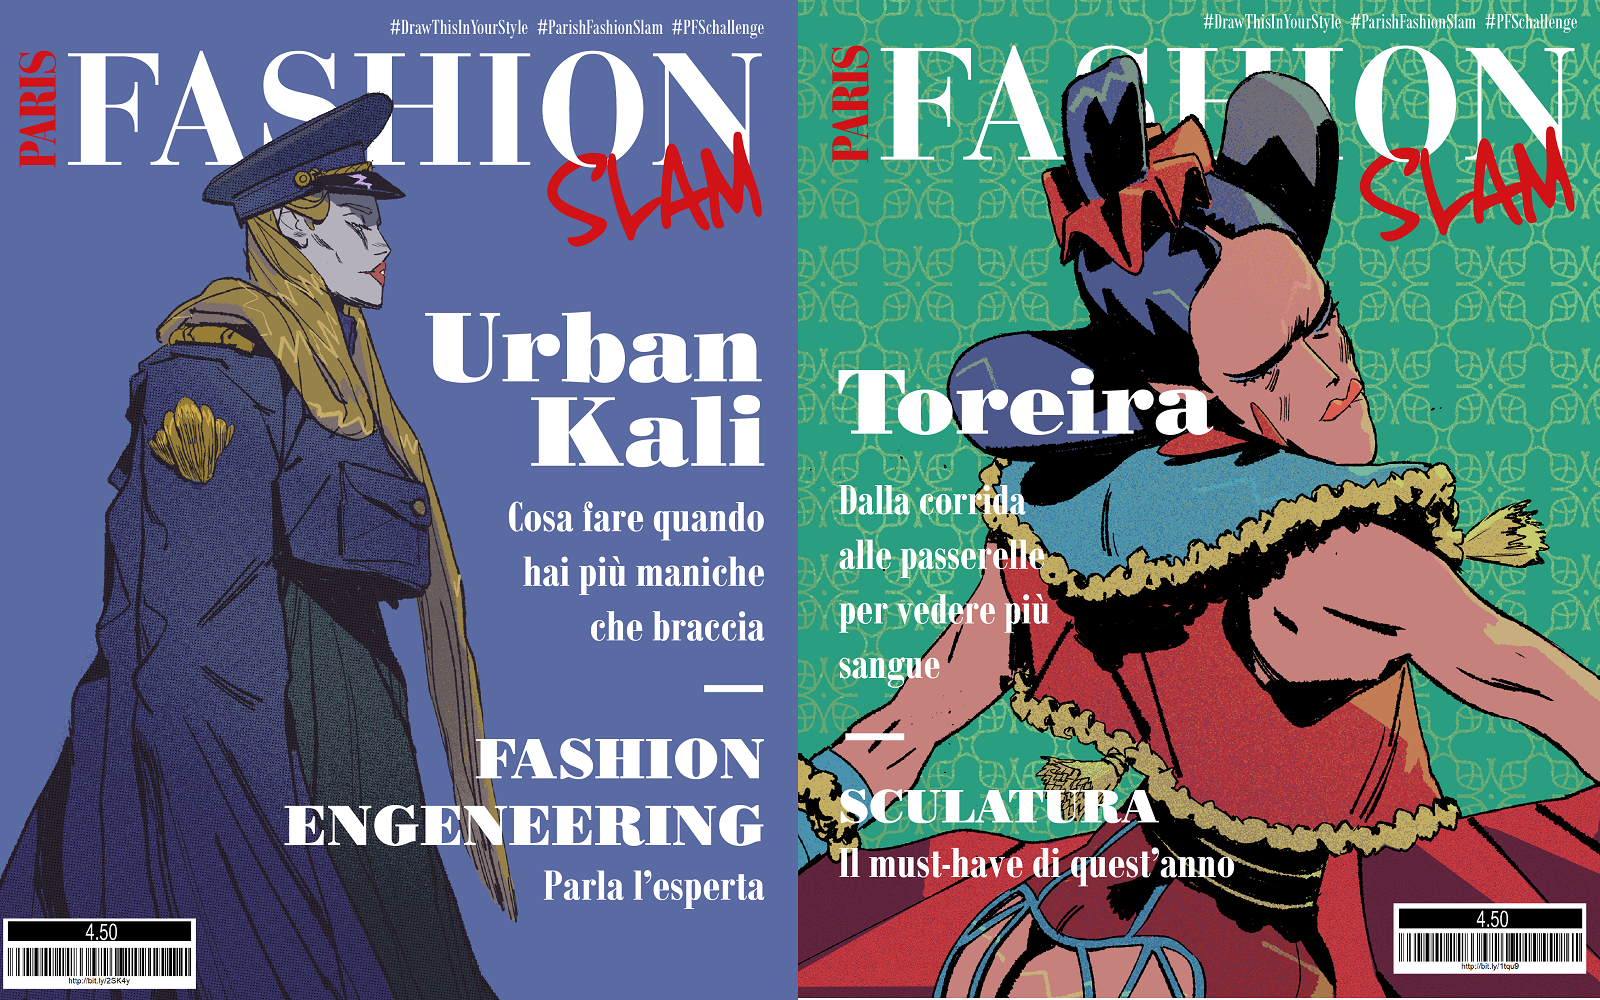 Paris Fashion Slam: the graphic novel that mocks fashion The debut book by Marco Russo and Alessio Fioriniello is a parody of the fashion system